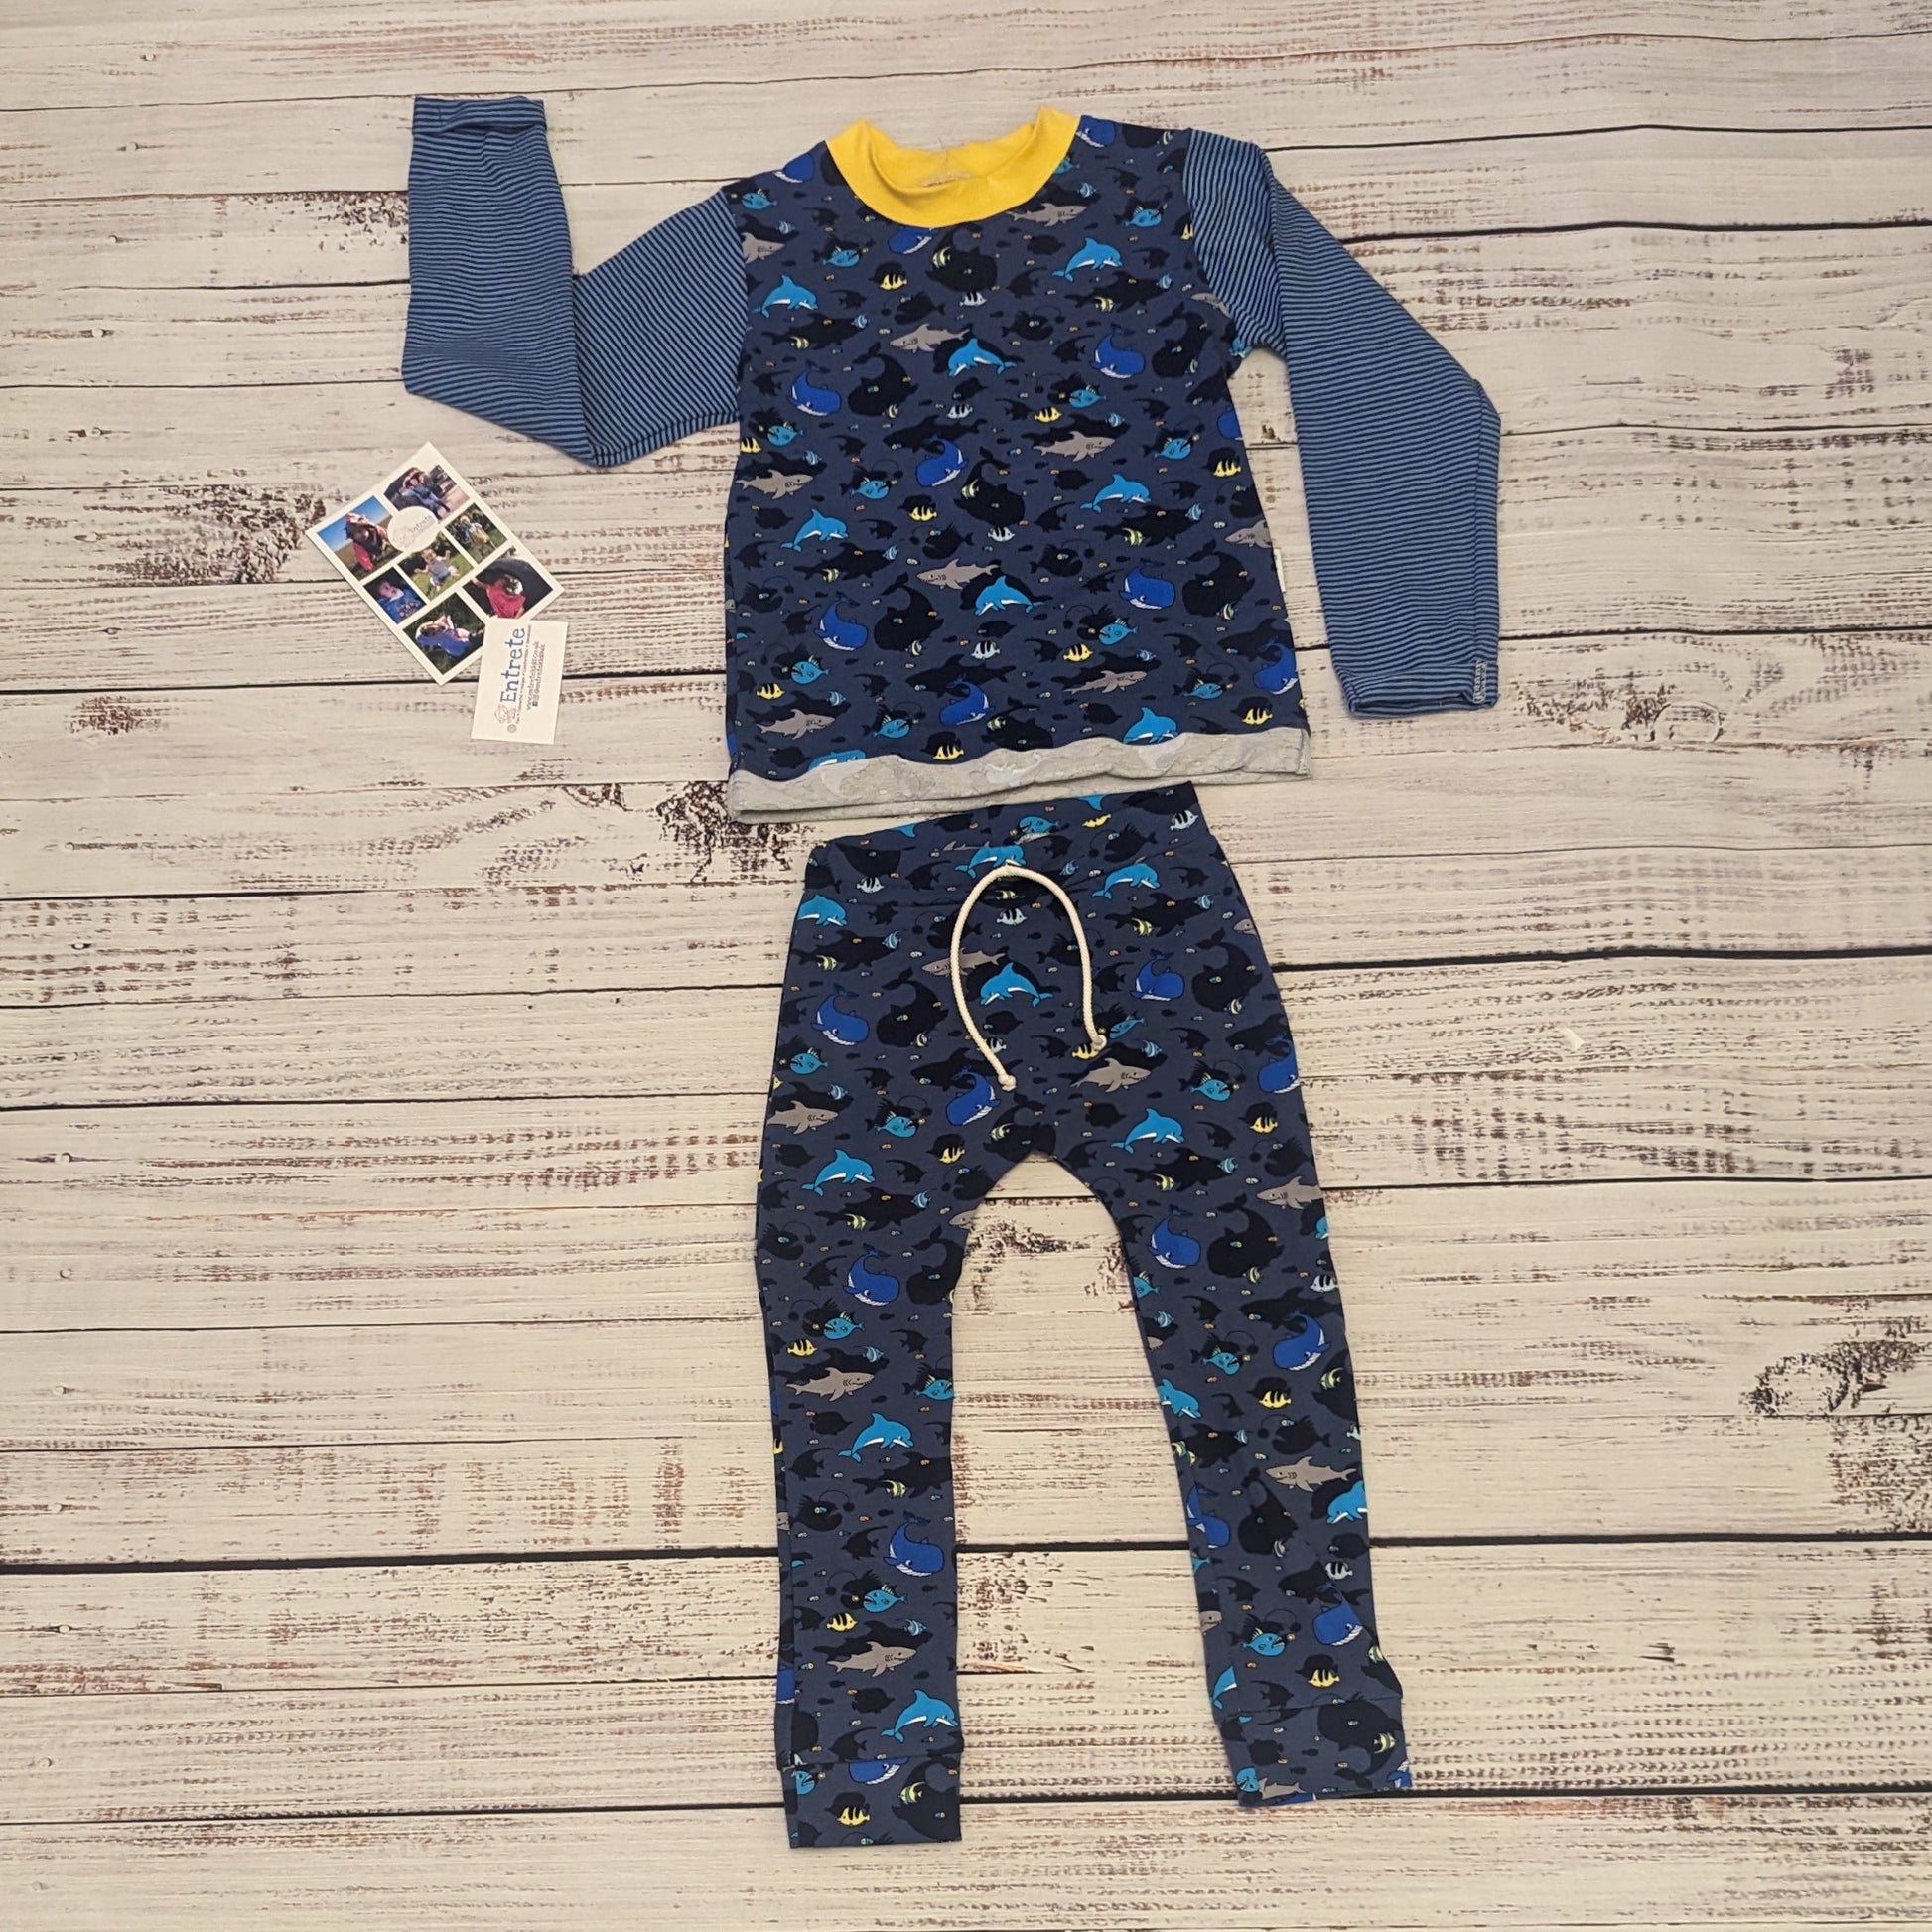 Kids navy sea creatures harem joggers. Handmade using navy sea life shadows cotton jersey. Shown as an outfit with matching long sleeve T-shirt.